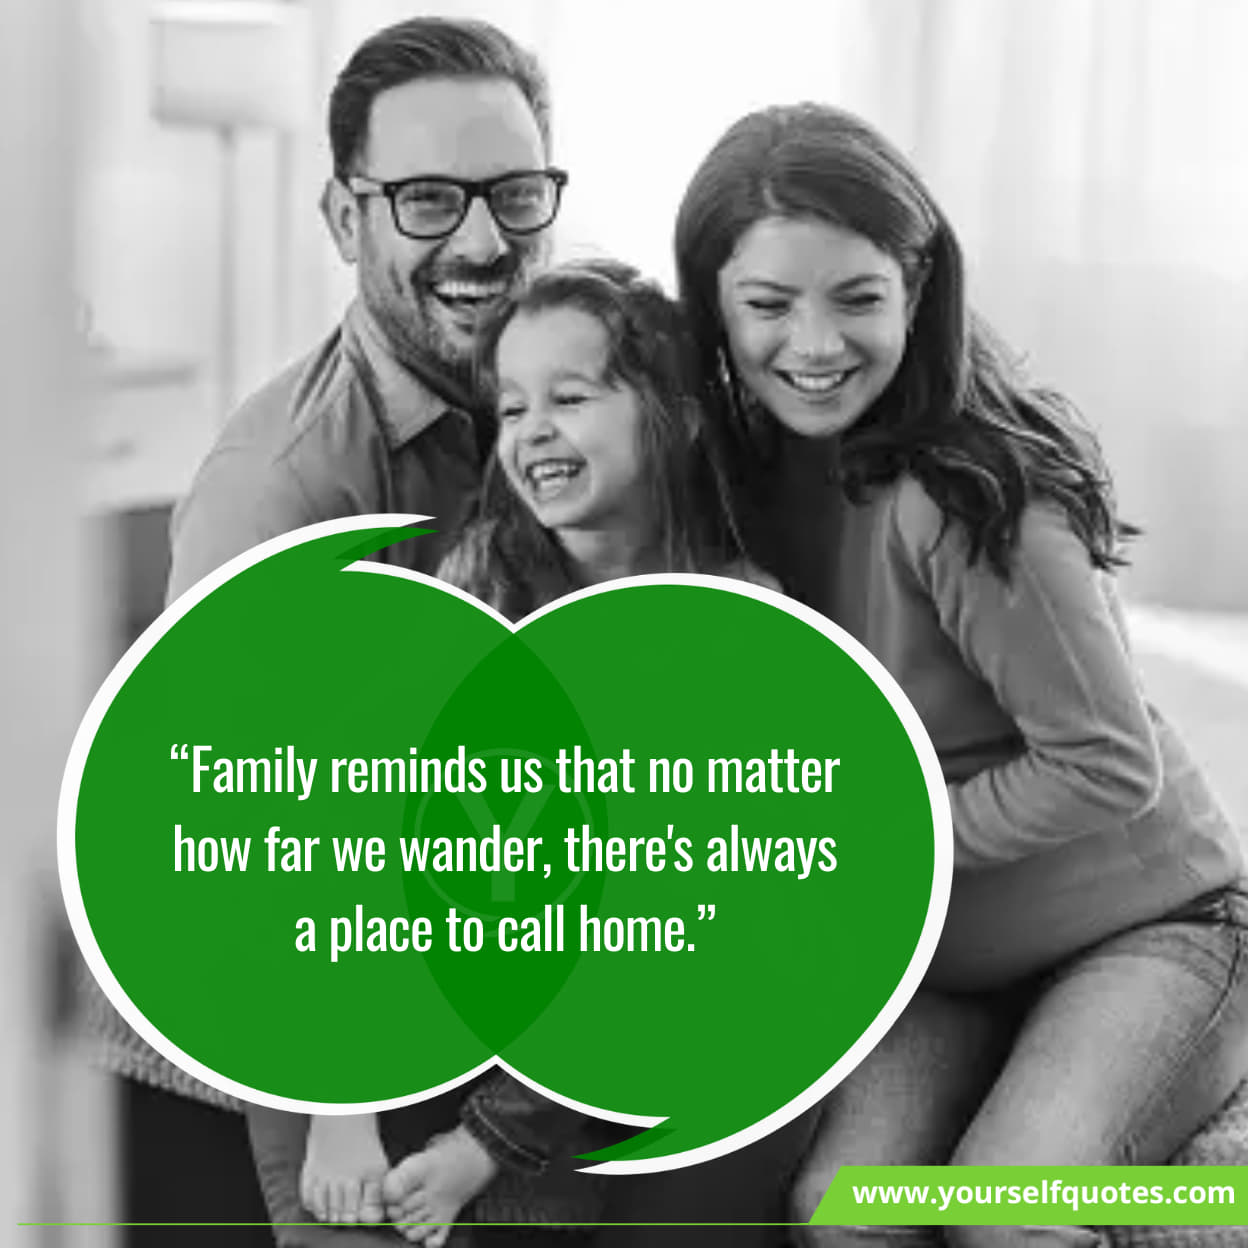 Motivational quotes about family